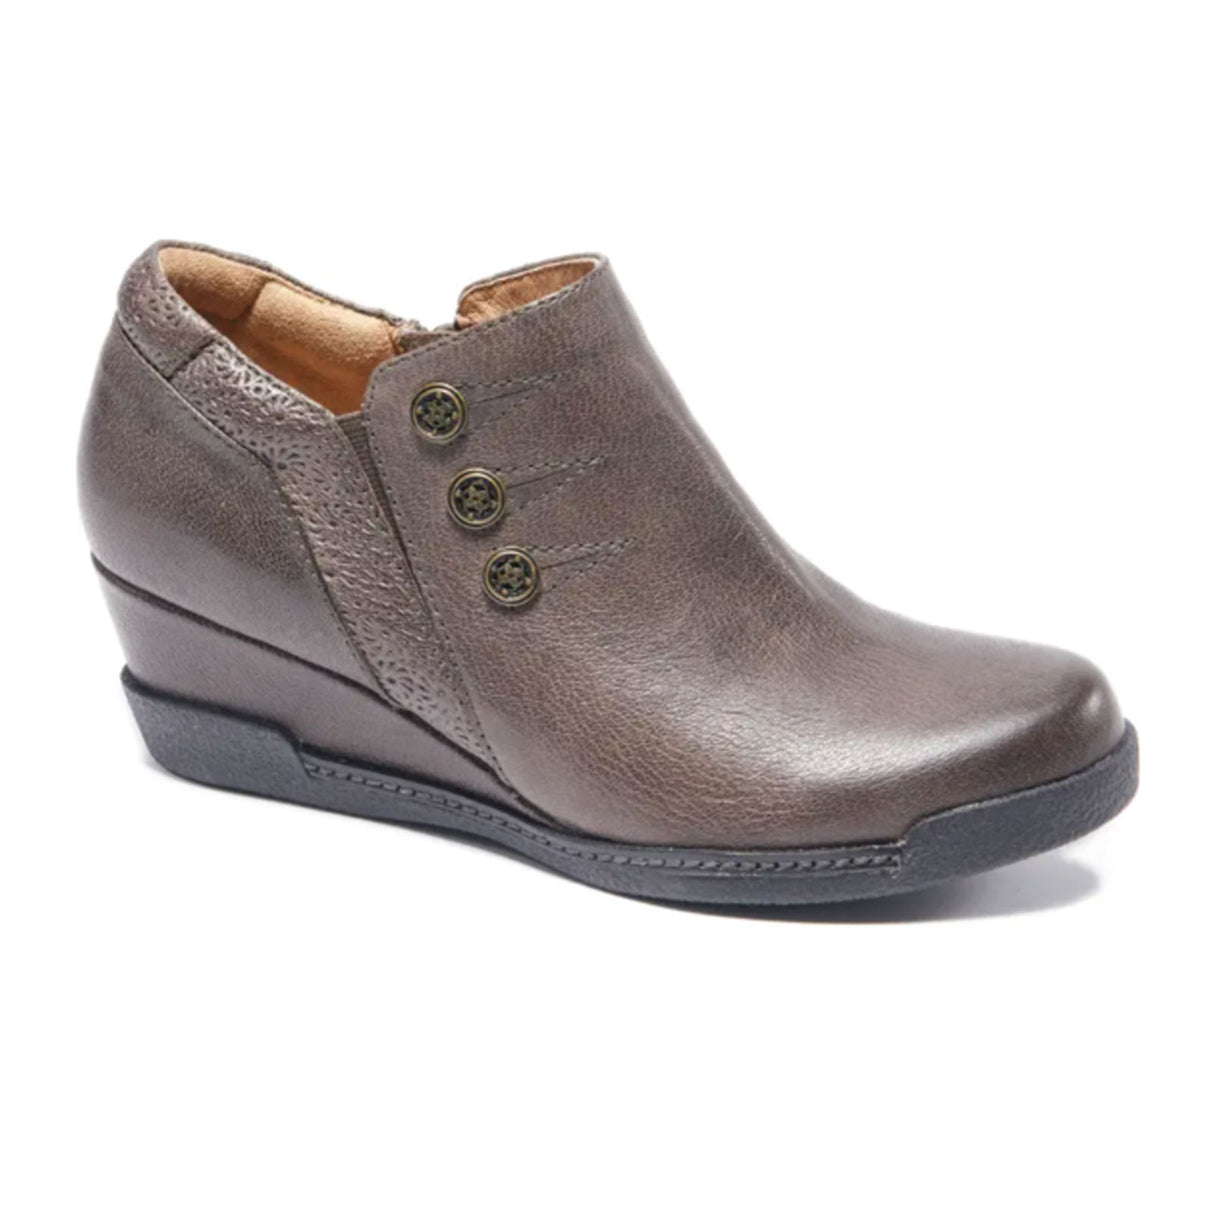 Halsa Devina Wedge Ankle Boot (Women) - Dark Grey Boots - Fashion - Ankle Boot - The Heel Shoe Fitters